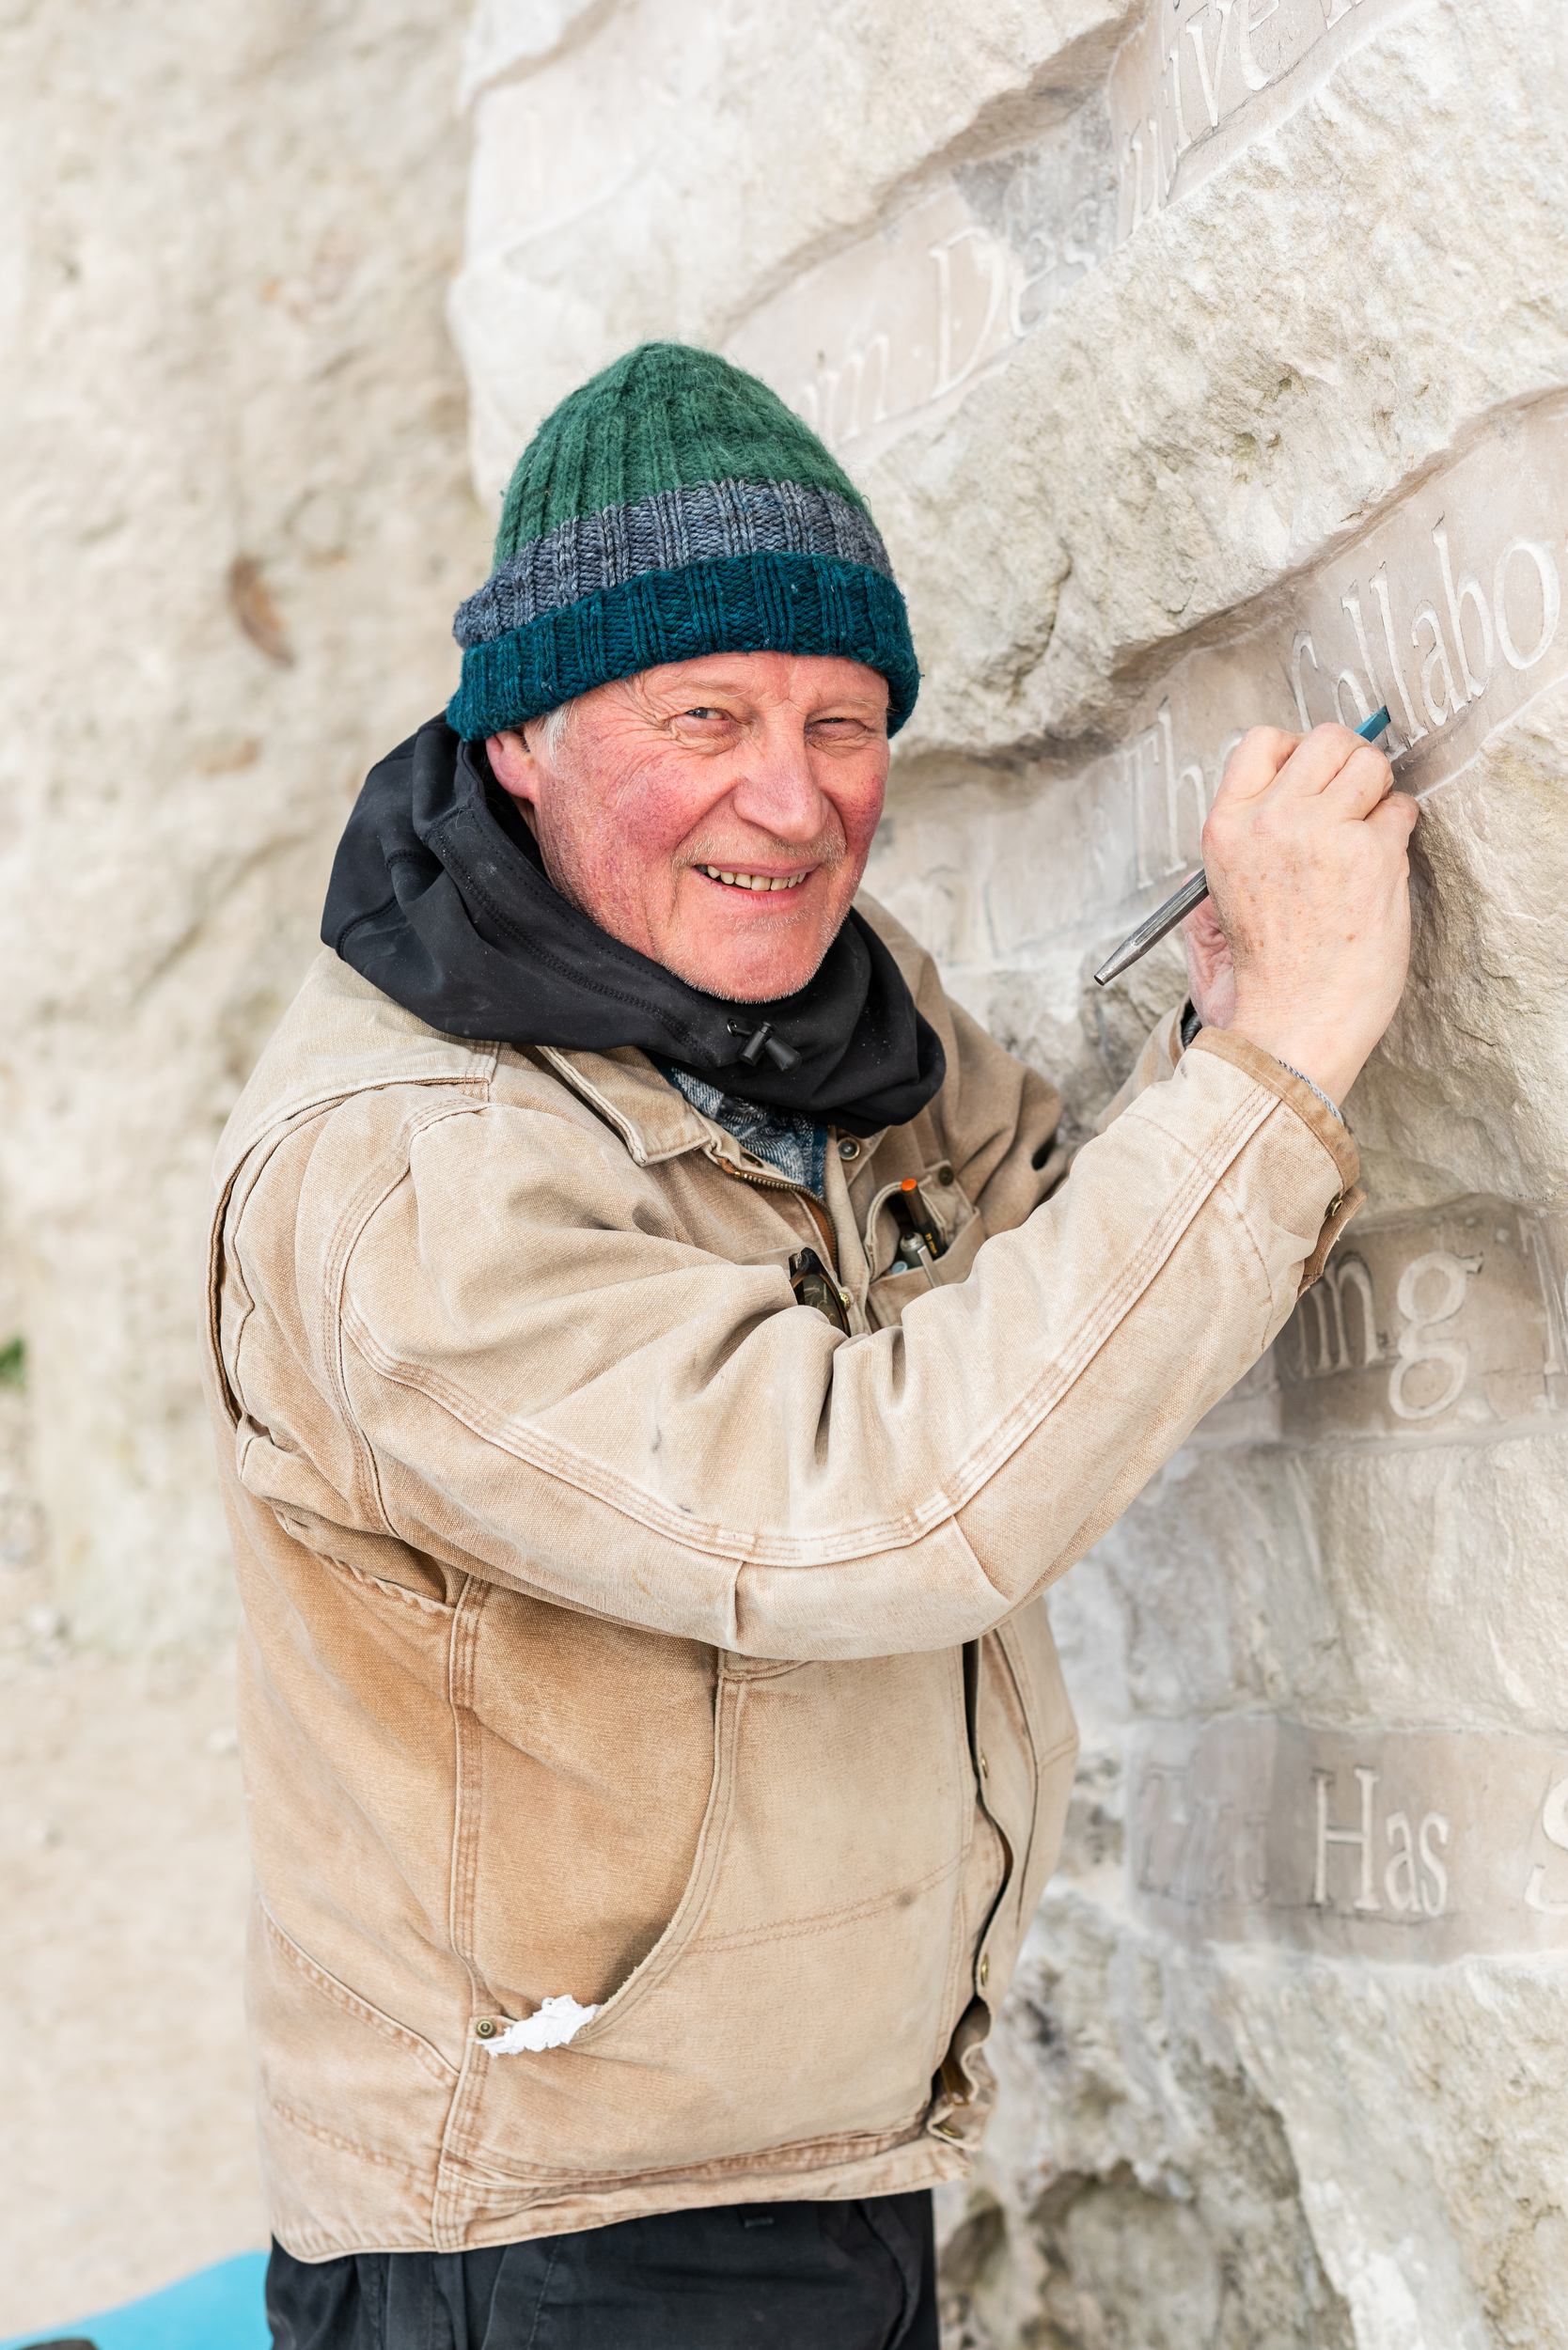 A man smiles and holds tools while standing next to a large stone with carved text on it